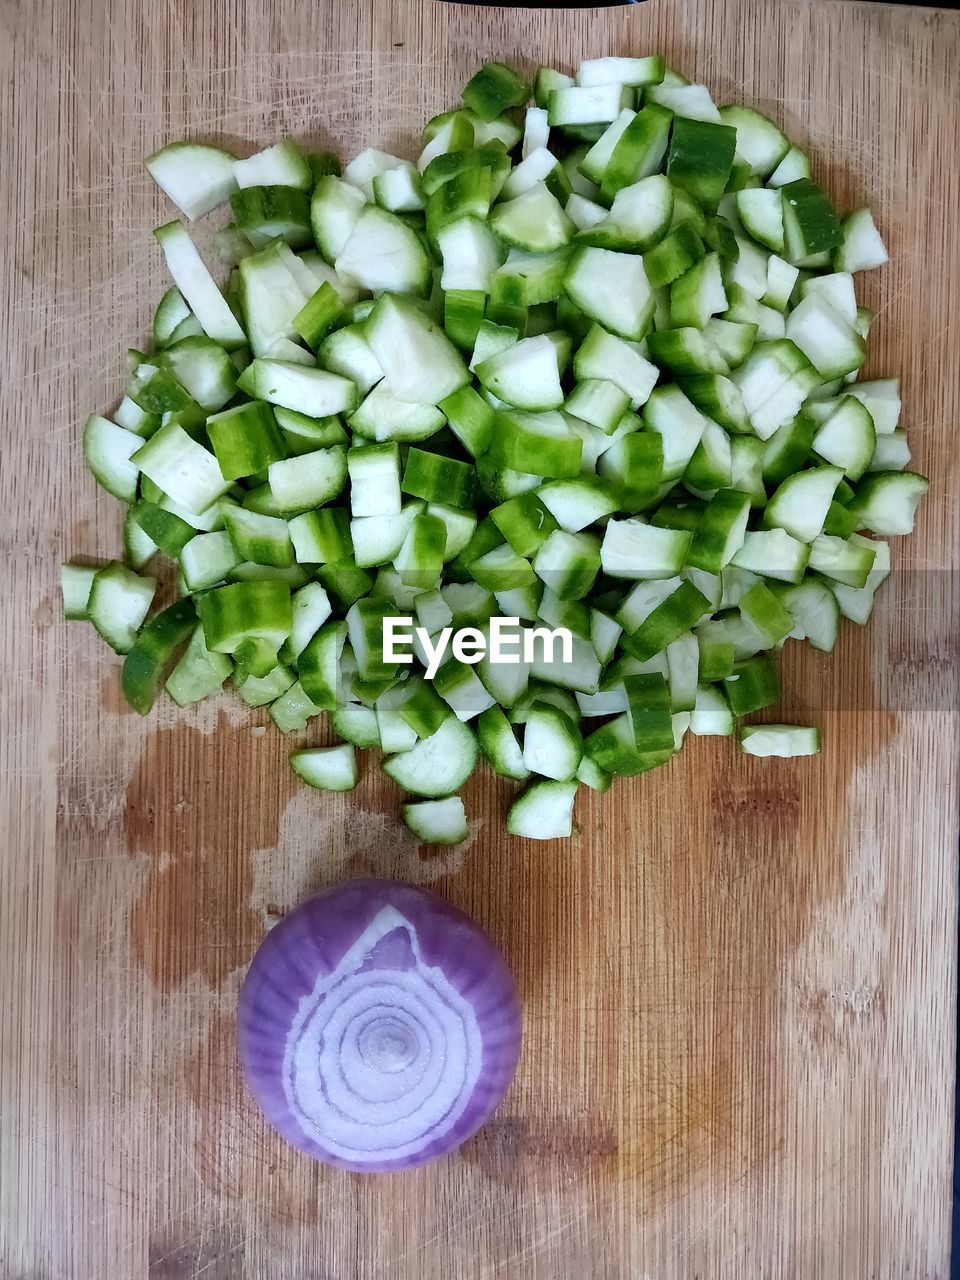 HIGH ANGLE VIEW OF CHOPPED VEGETABLES ON TABLE